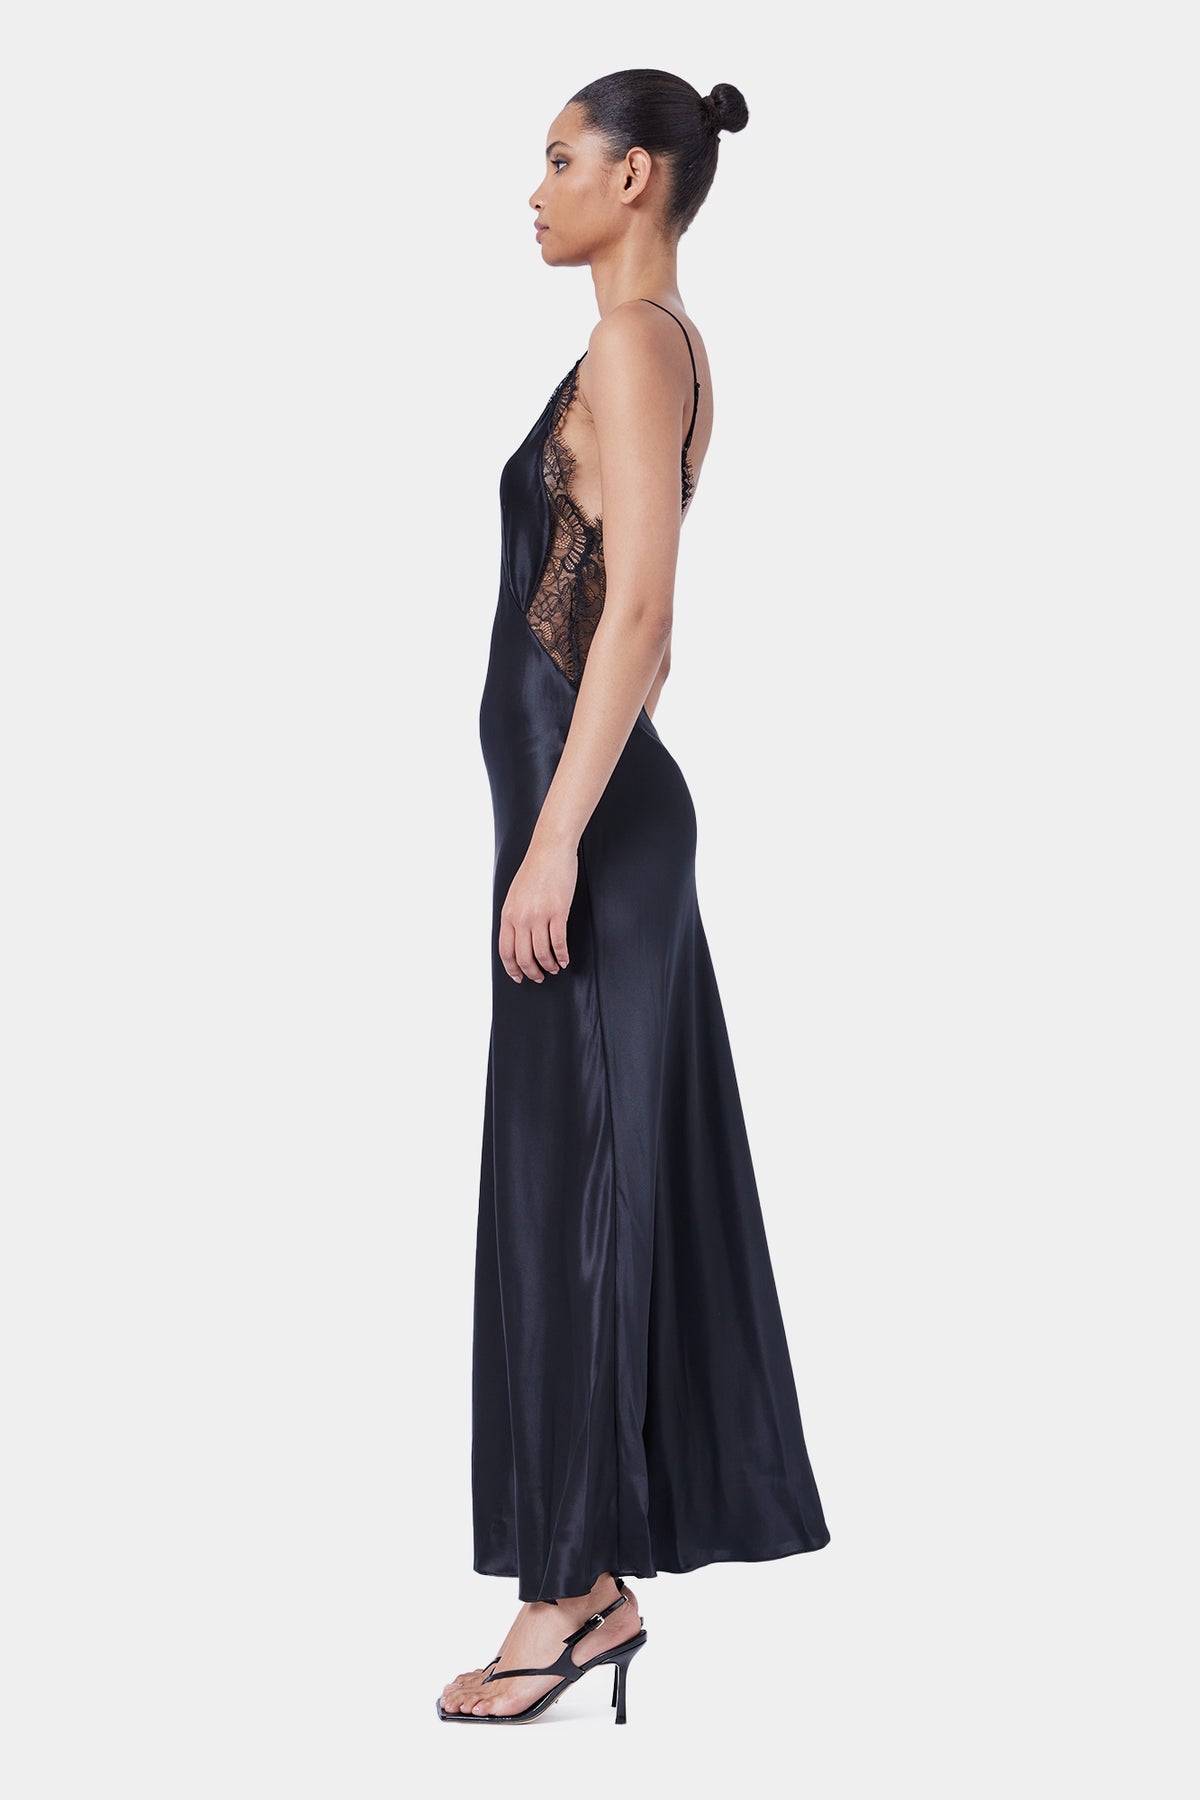 The Cascading Lace Maxi Dress By GINIA In Black